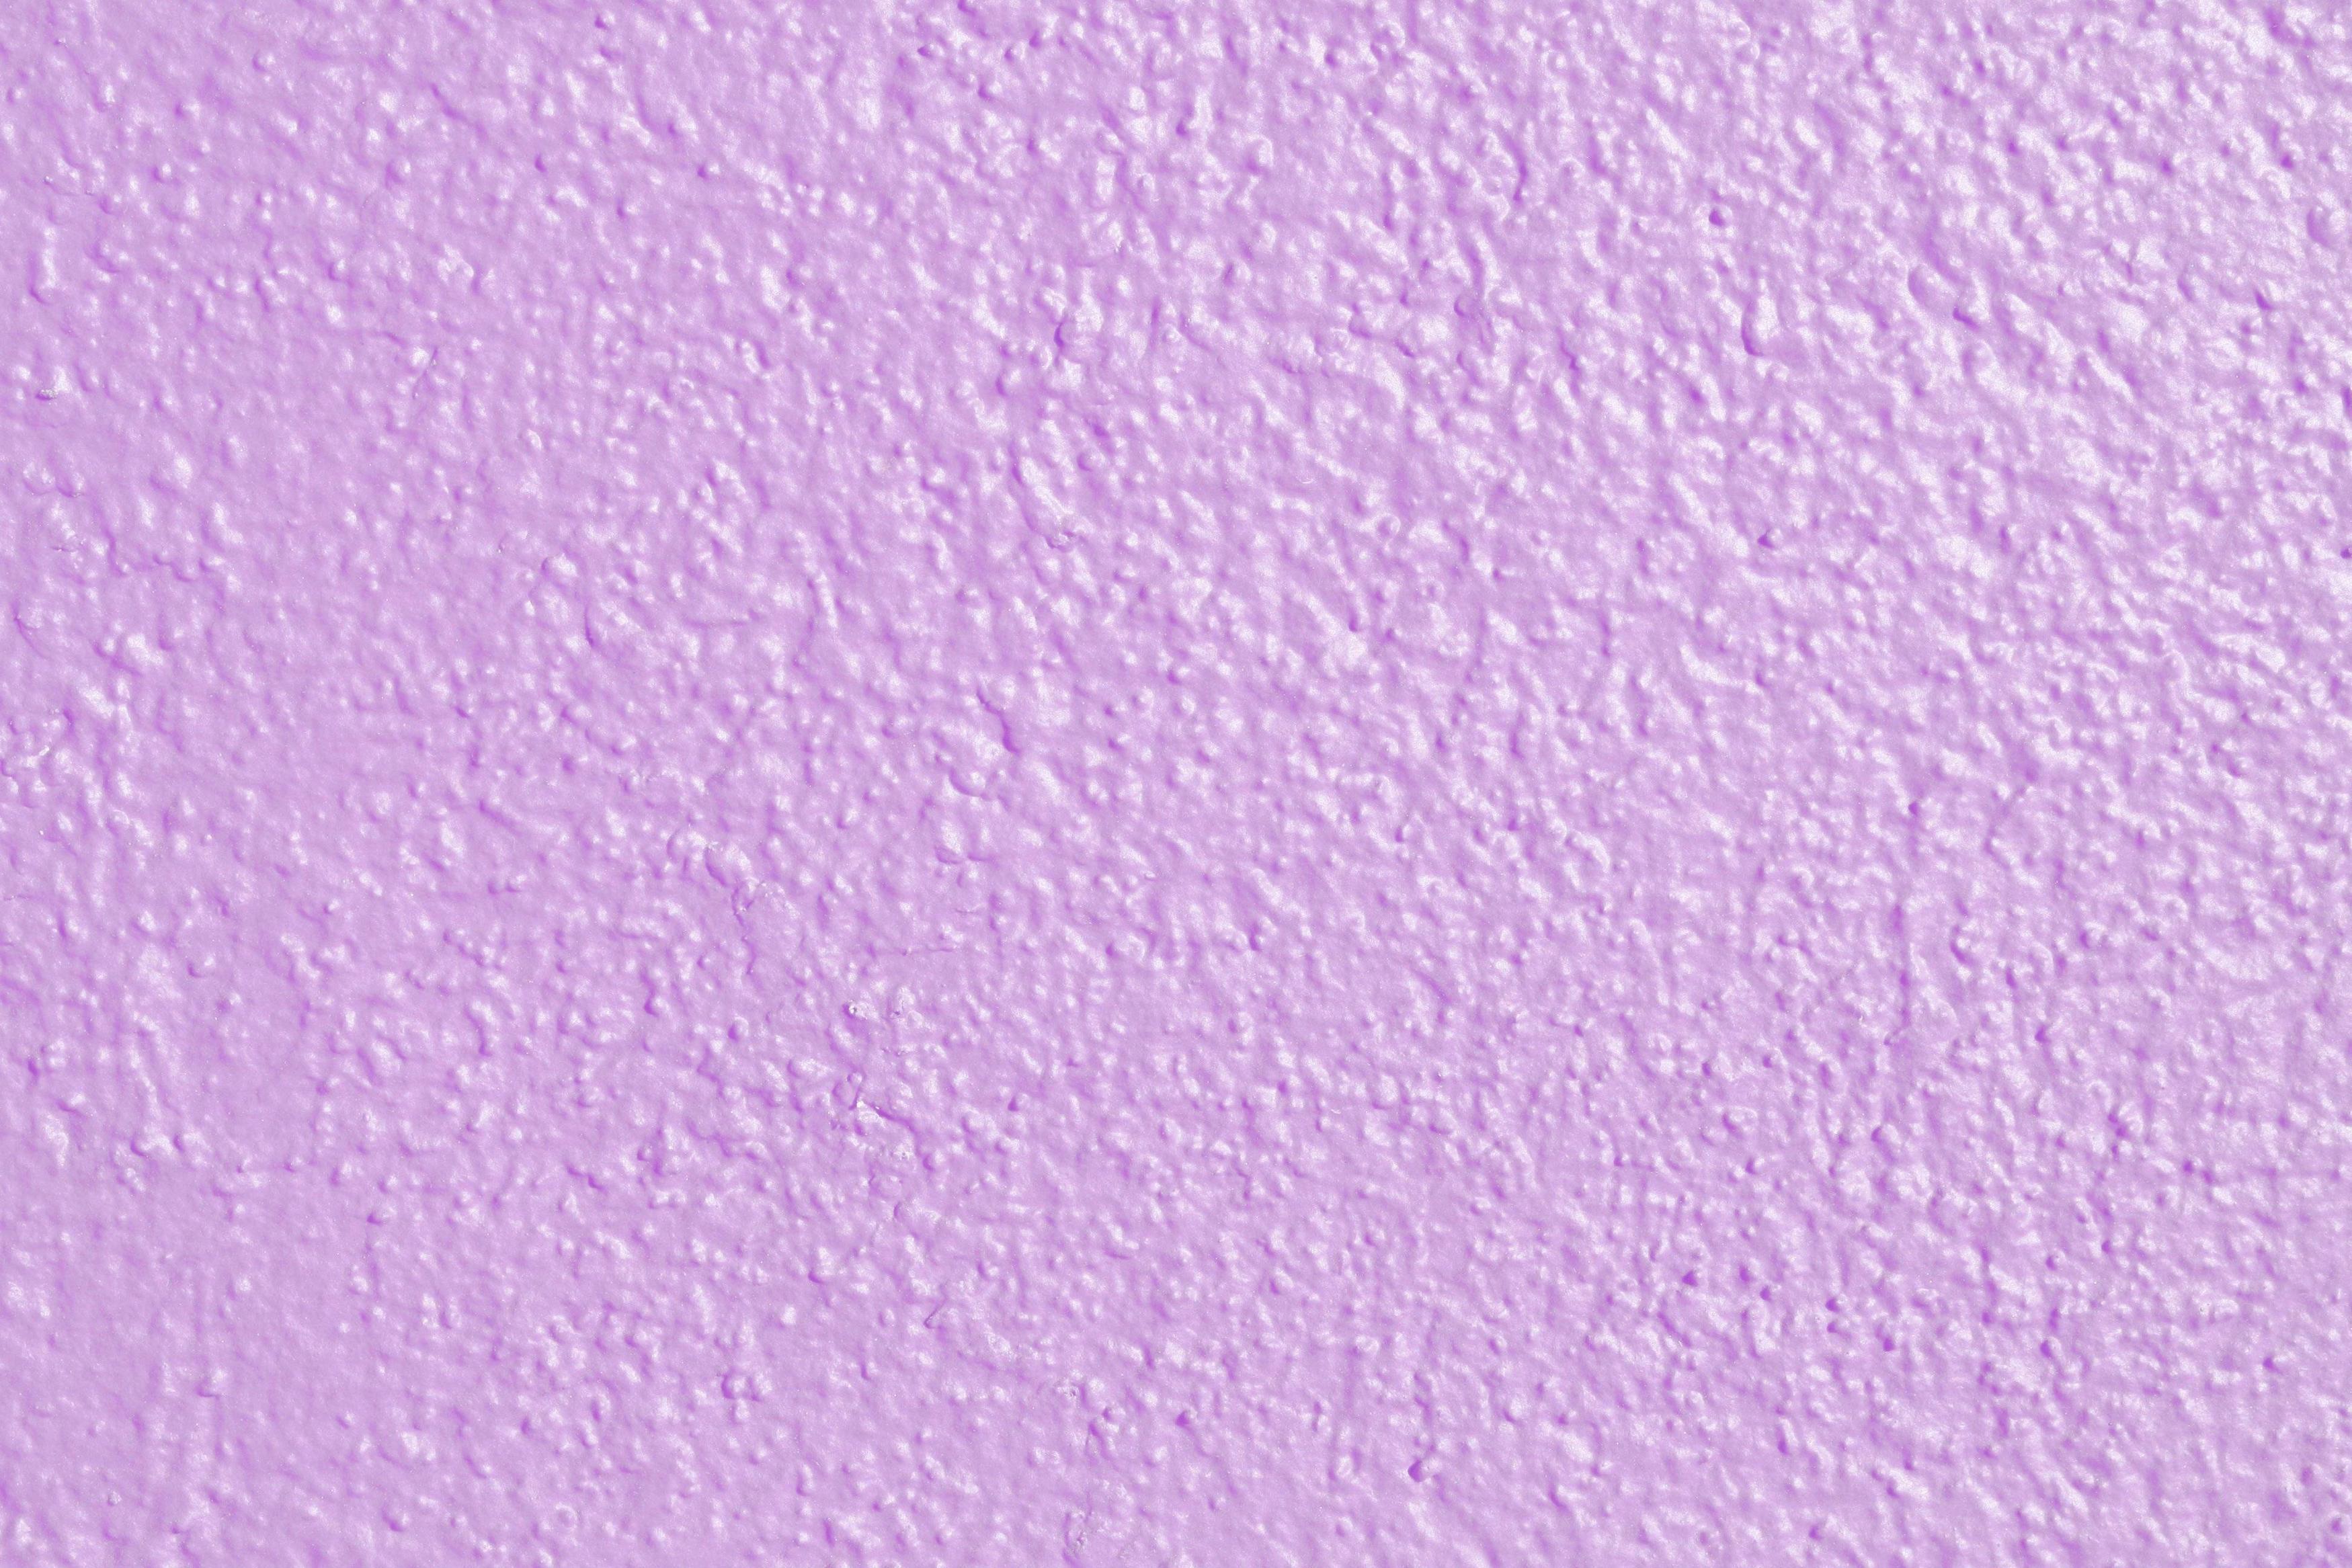 Lavender Light Purple Painted Wall Texture Picture. Free Photograph